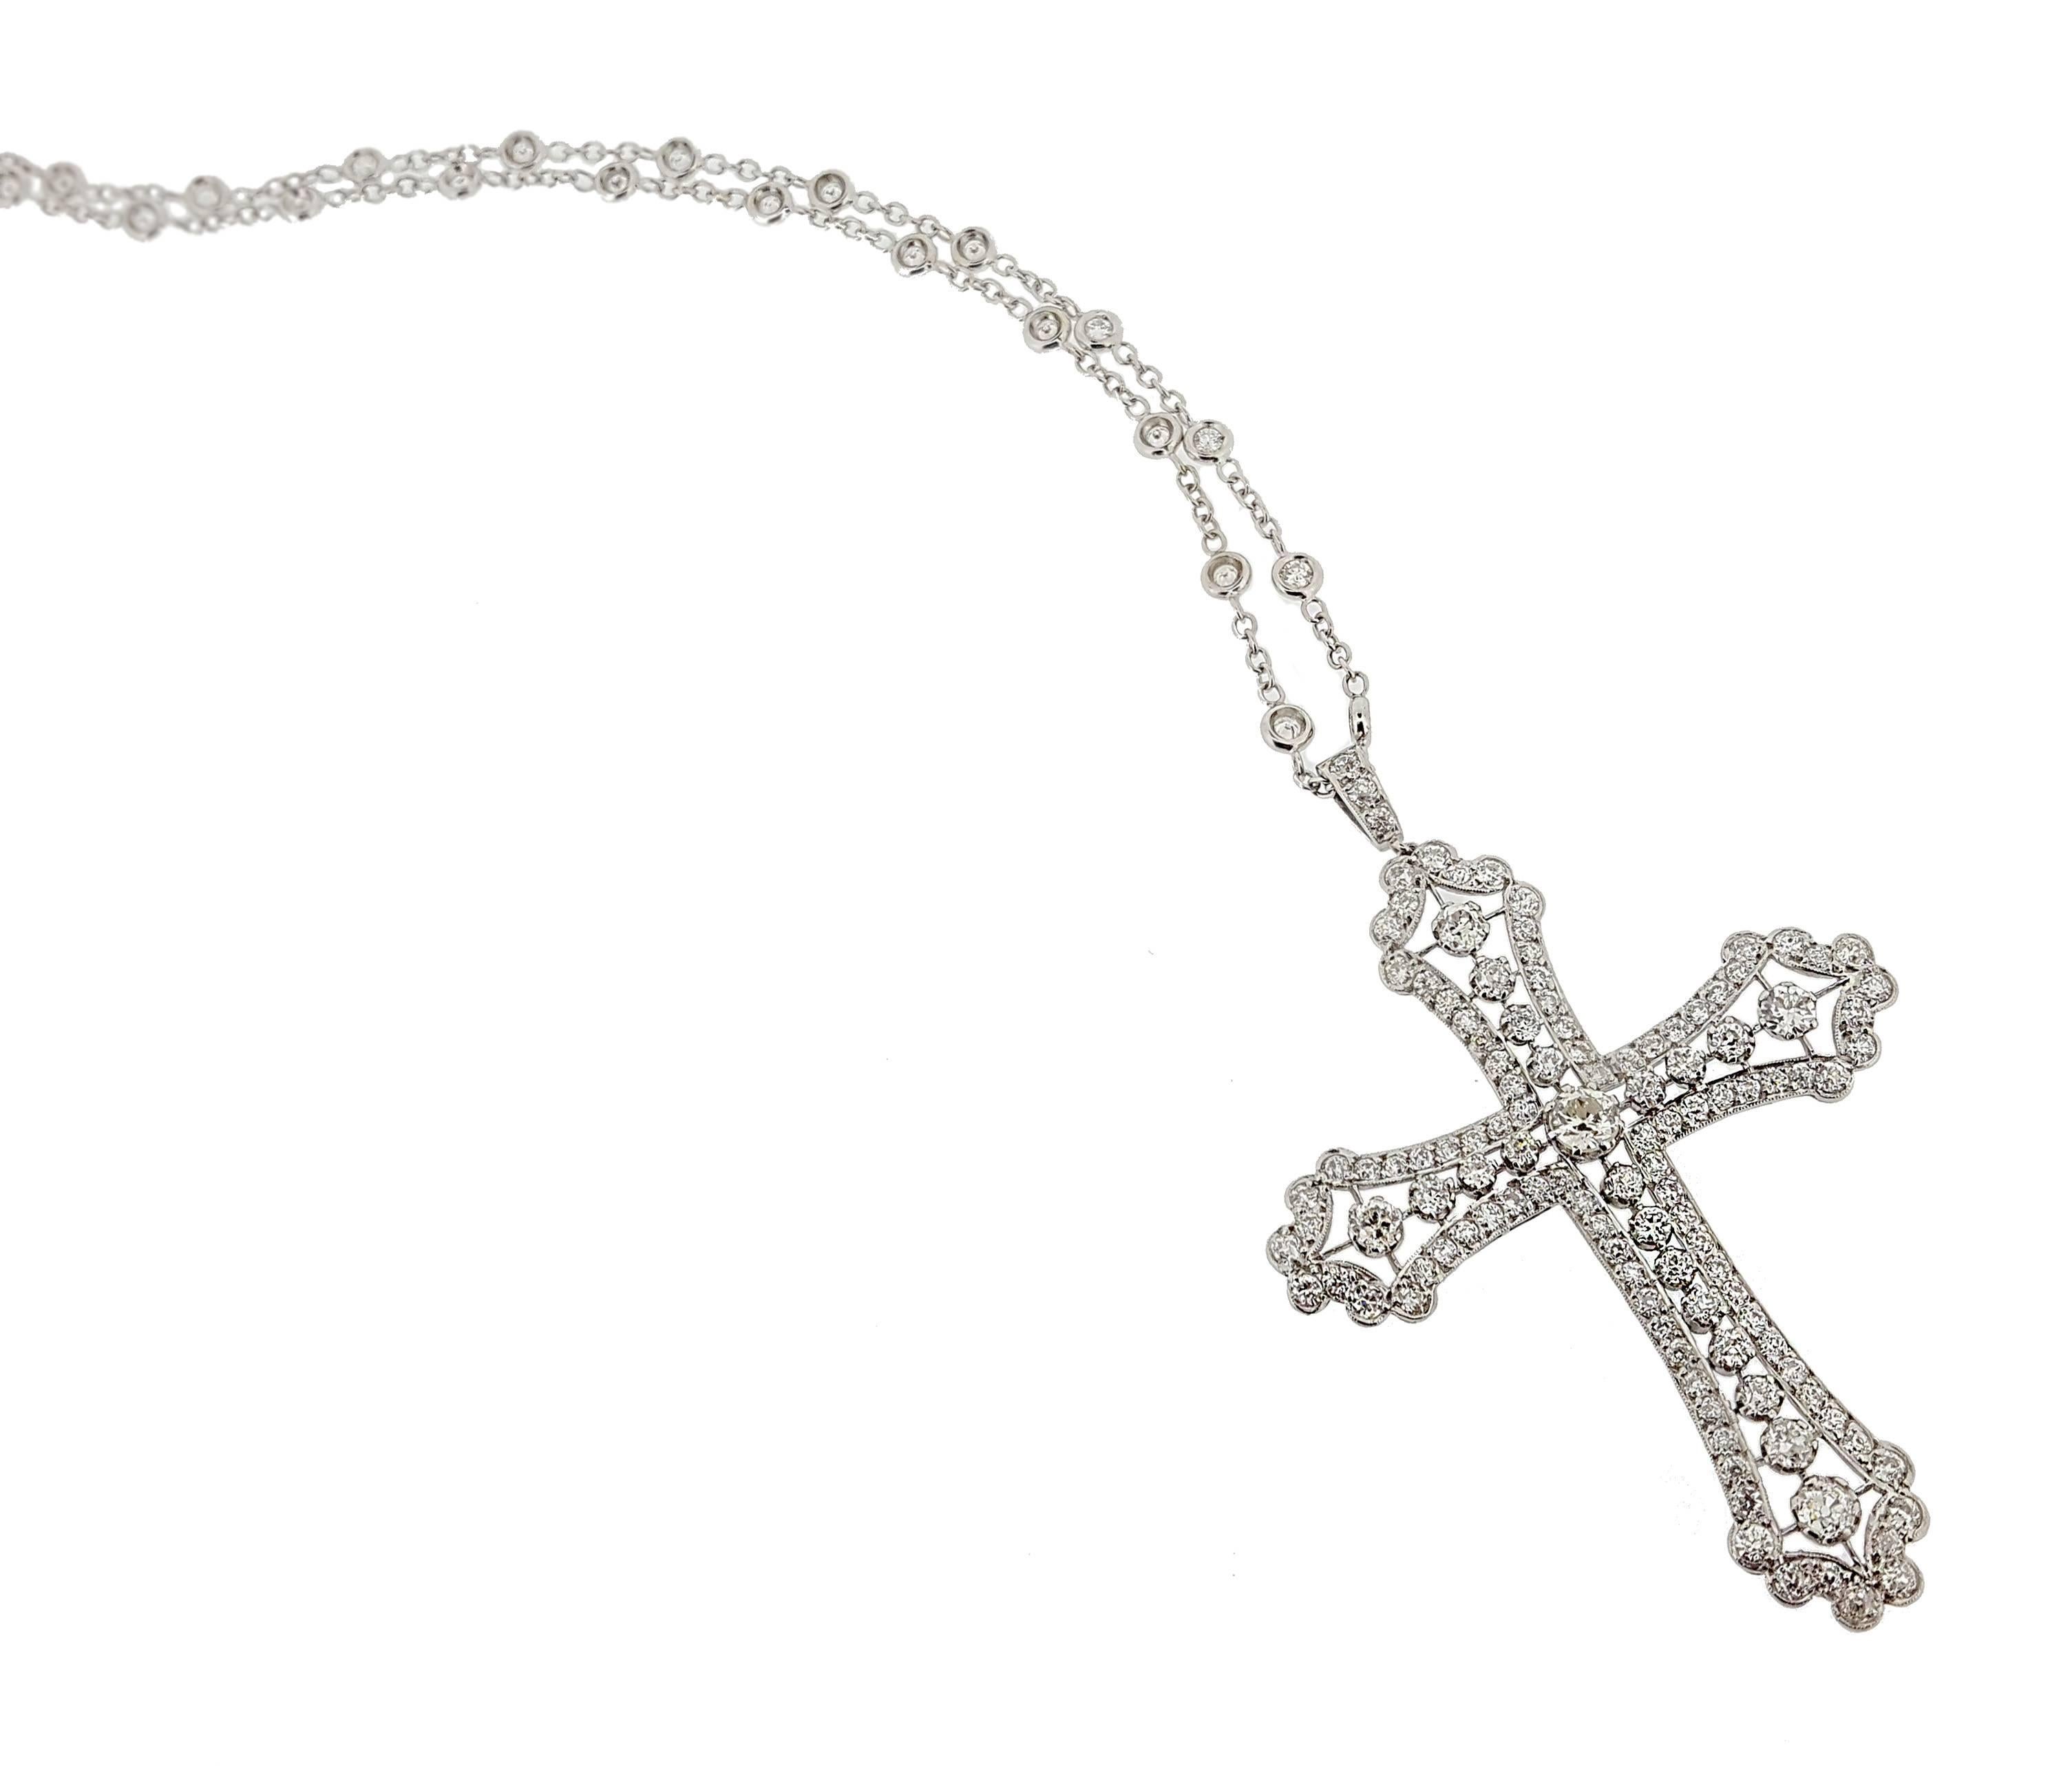 This beautiful, large, diamond cross pendant and diamond station chain boasts approximately 4.50ctw of sparkling diamonds. The pendant measures 2.5 inches long including bail, and 1.75 inches across. The chain itself, is 16 inches long and secured